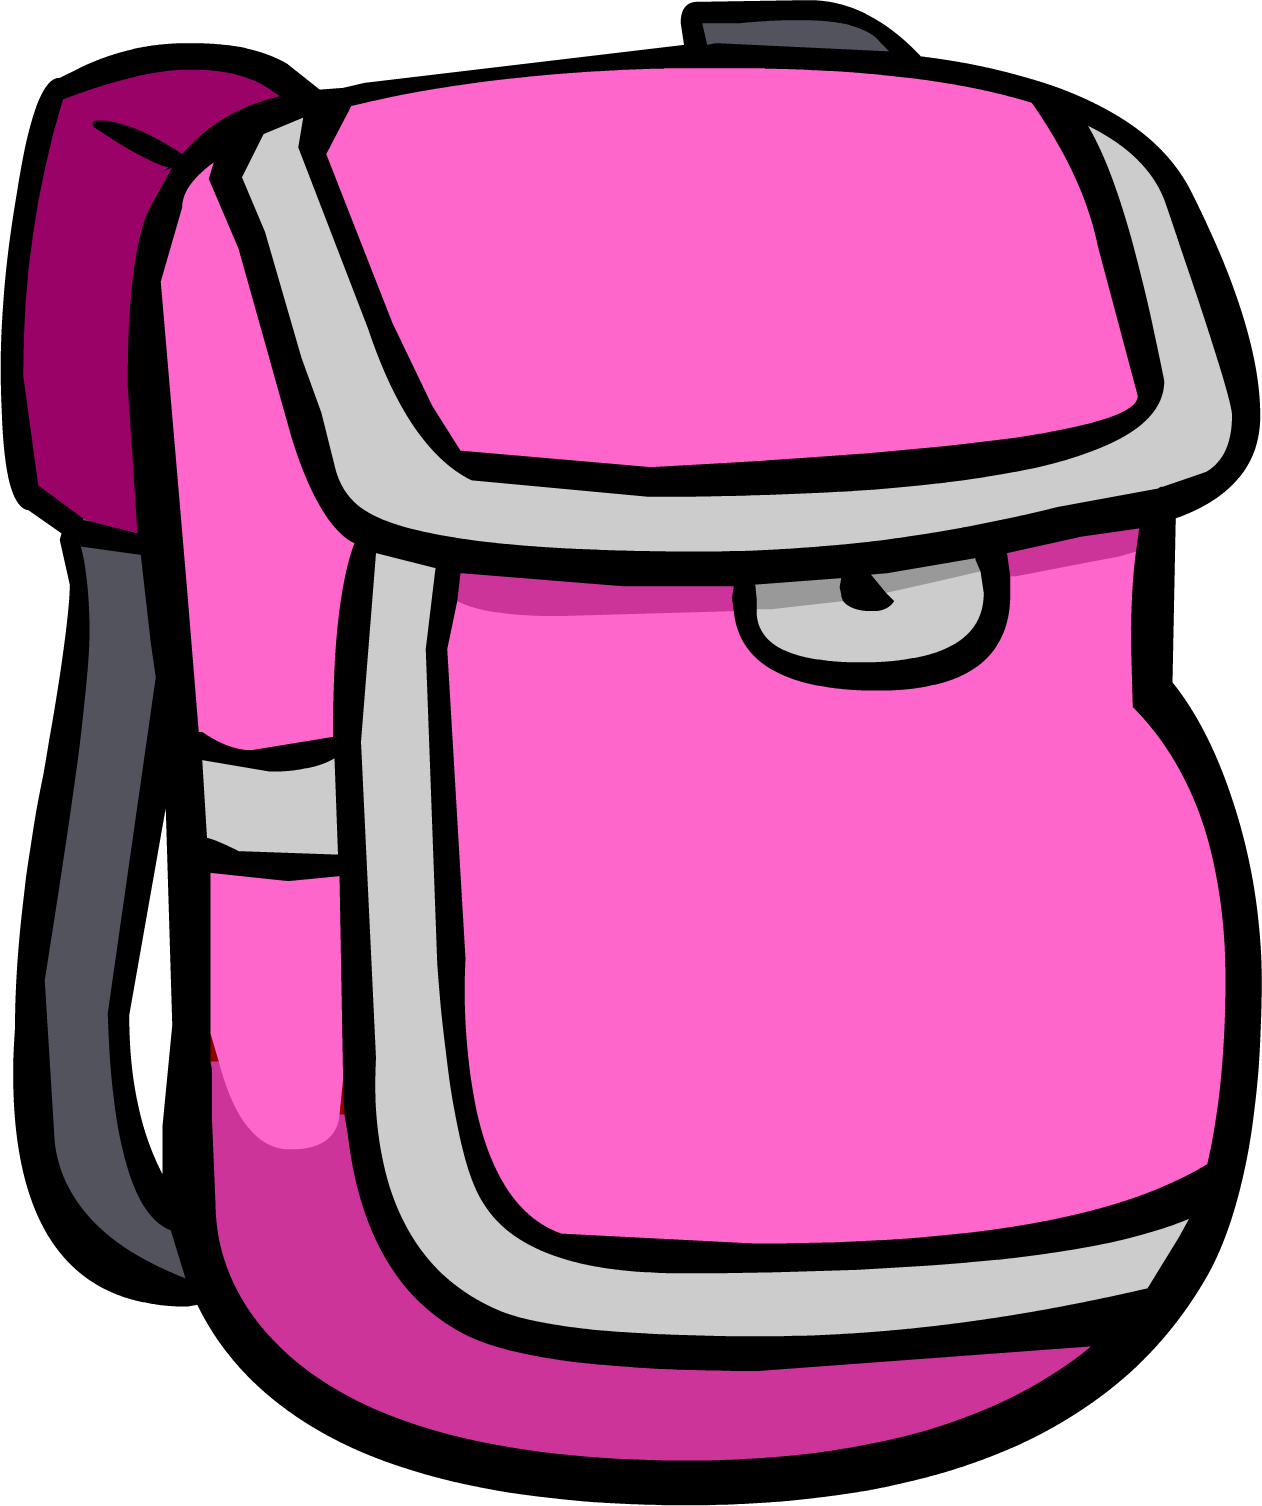 Clipart backpack pink backpack, Clipart backpack pink